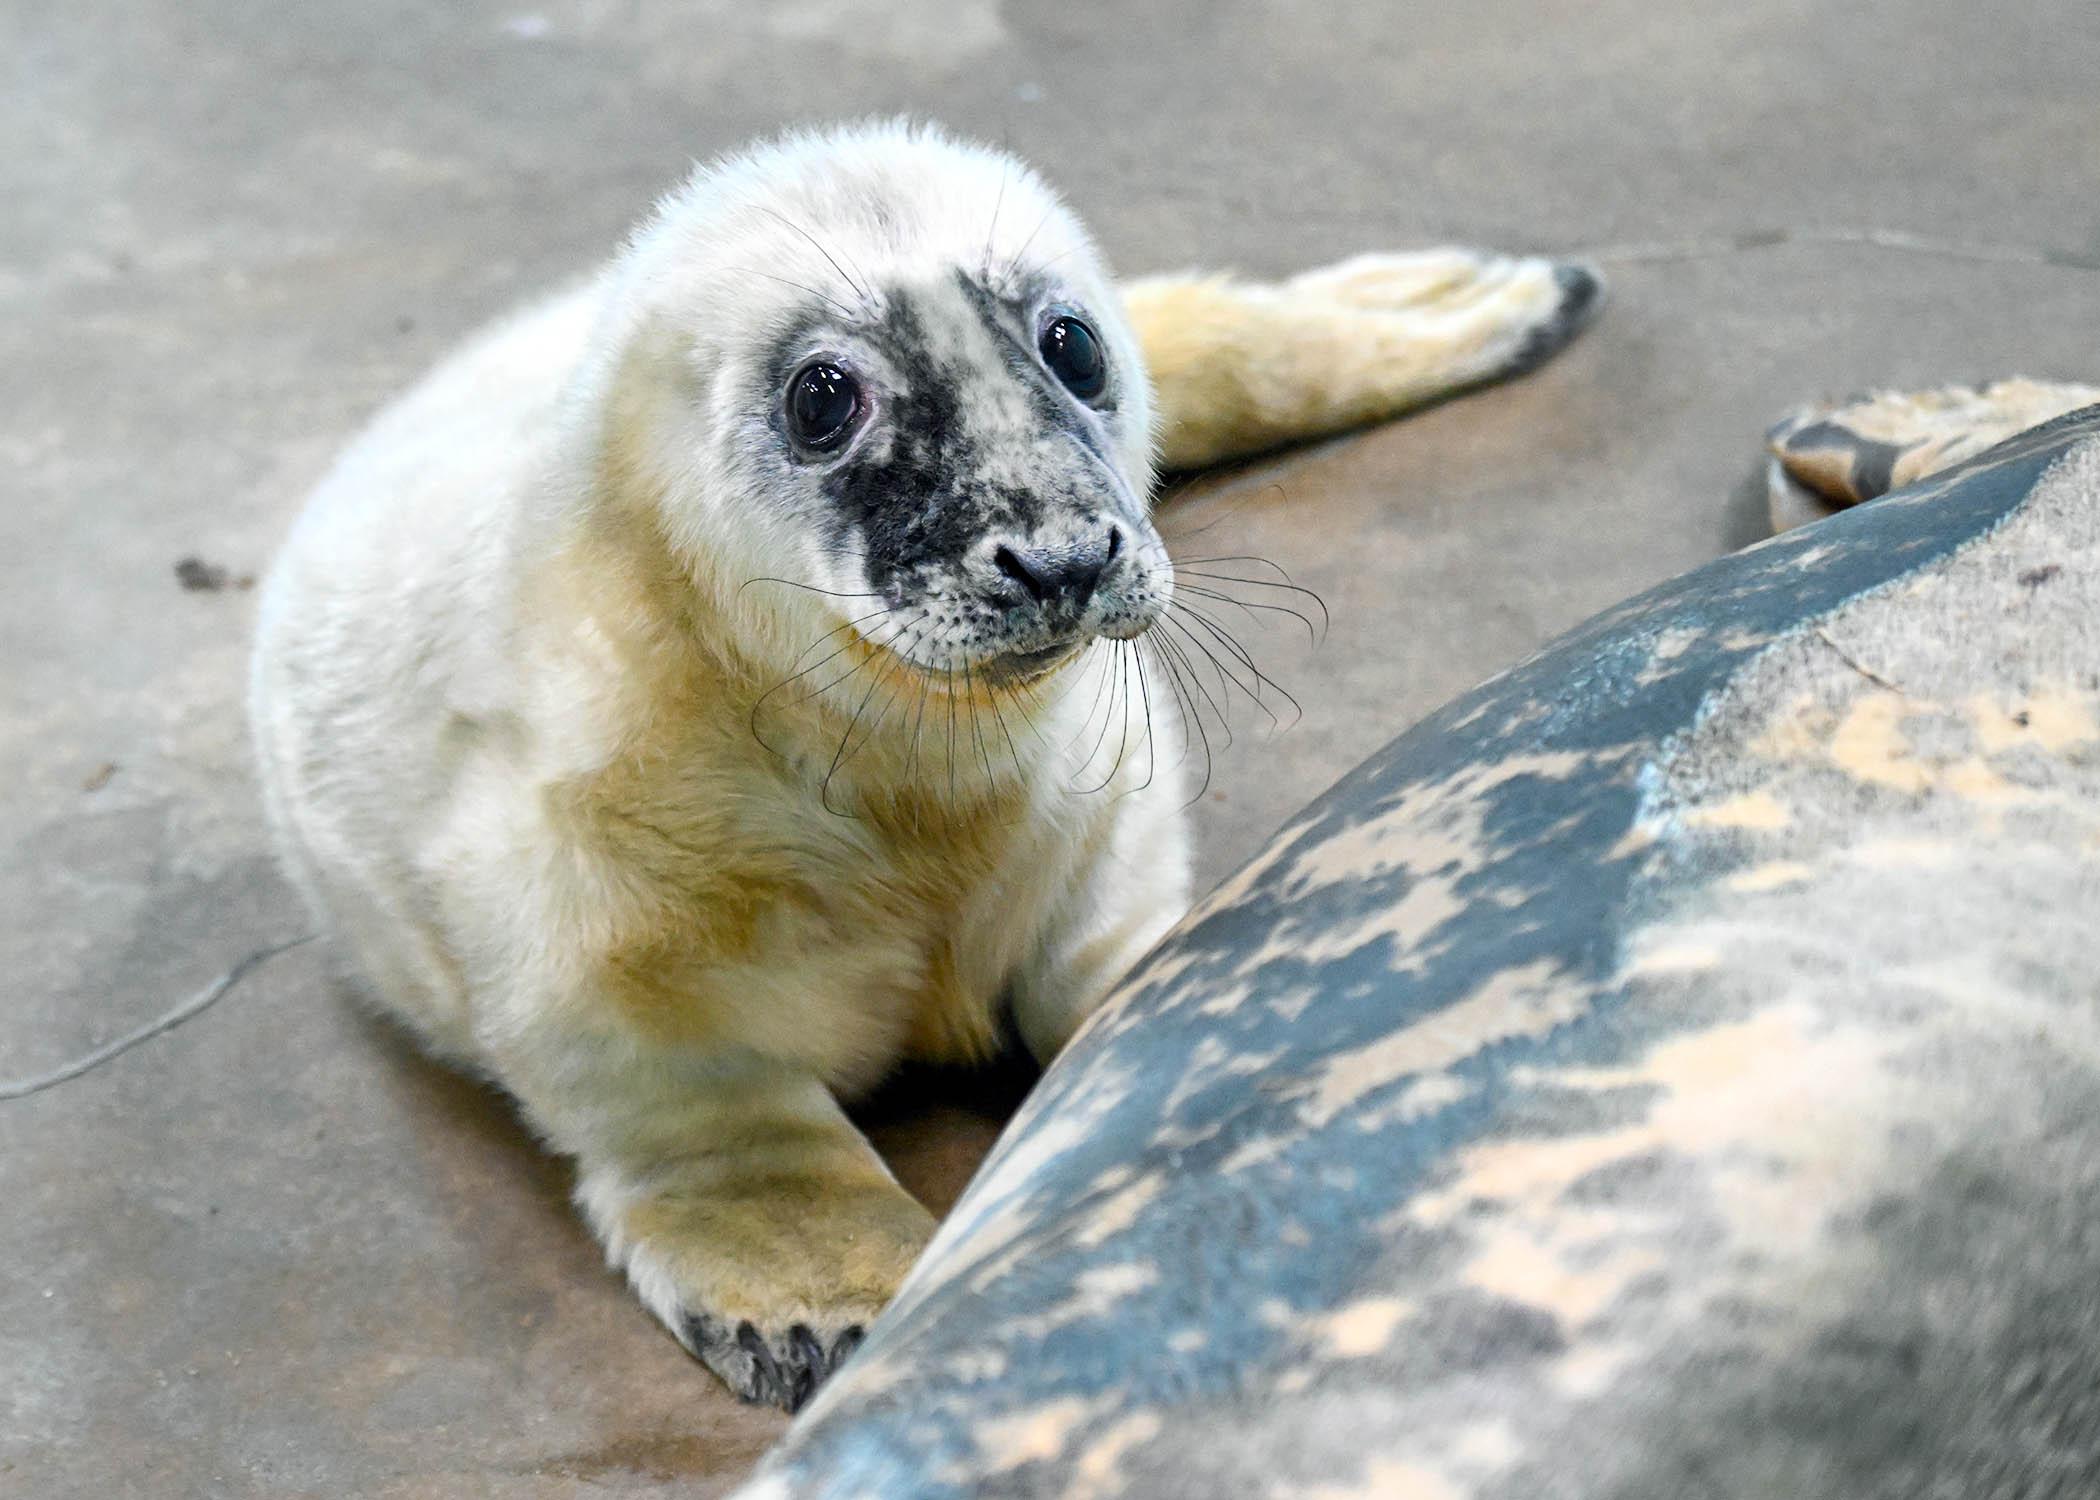 In the wild, baby grey seals grow up fast, weaned after several weeks and on their own for hunting food. (Courtesy of Brookfield Zoo)